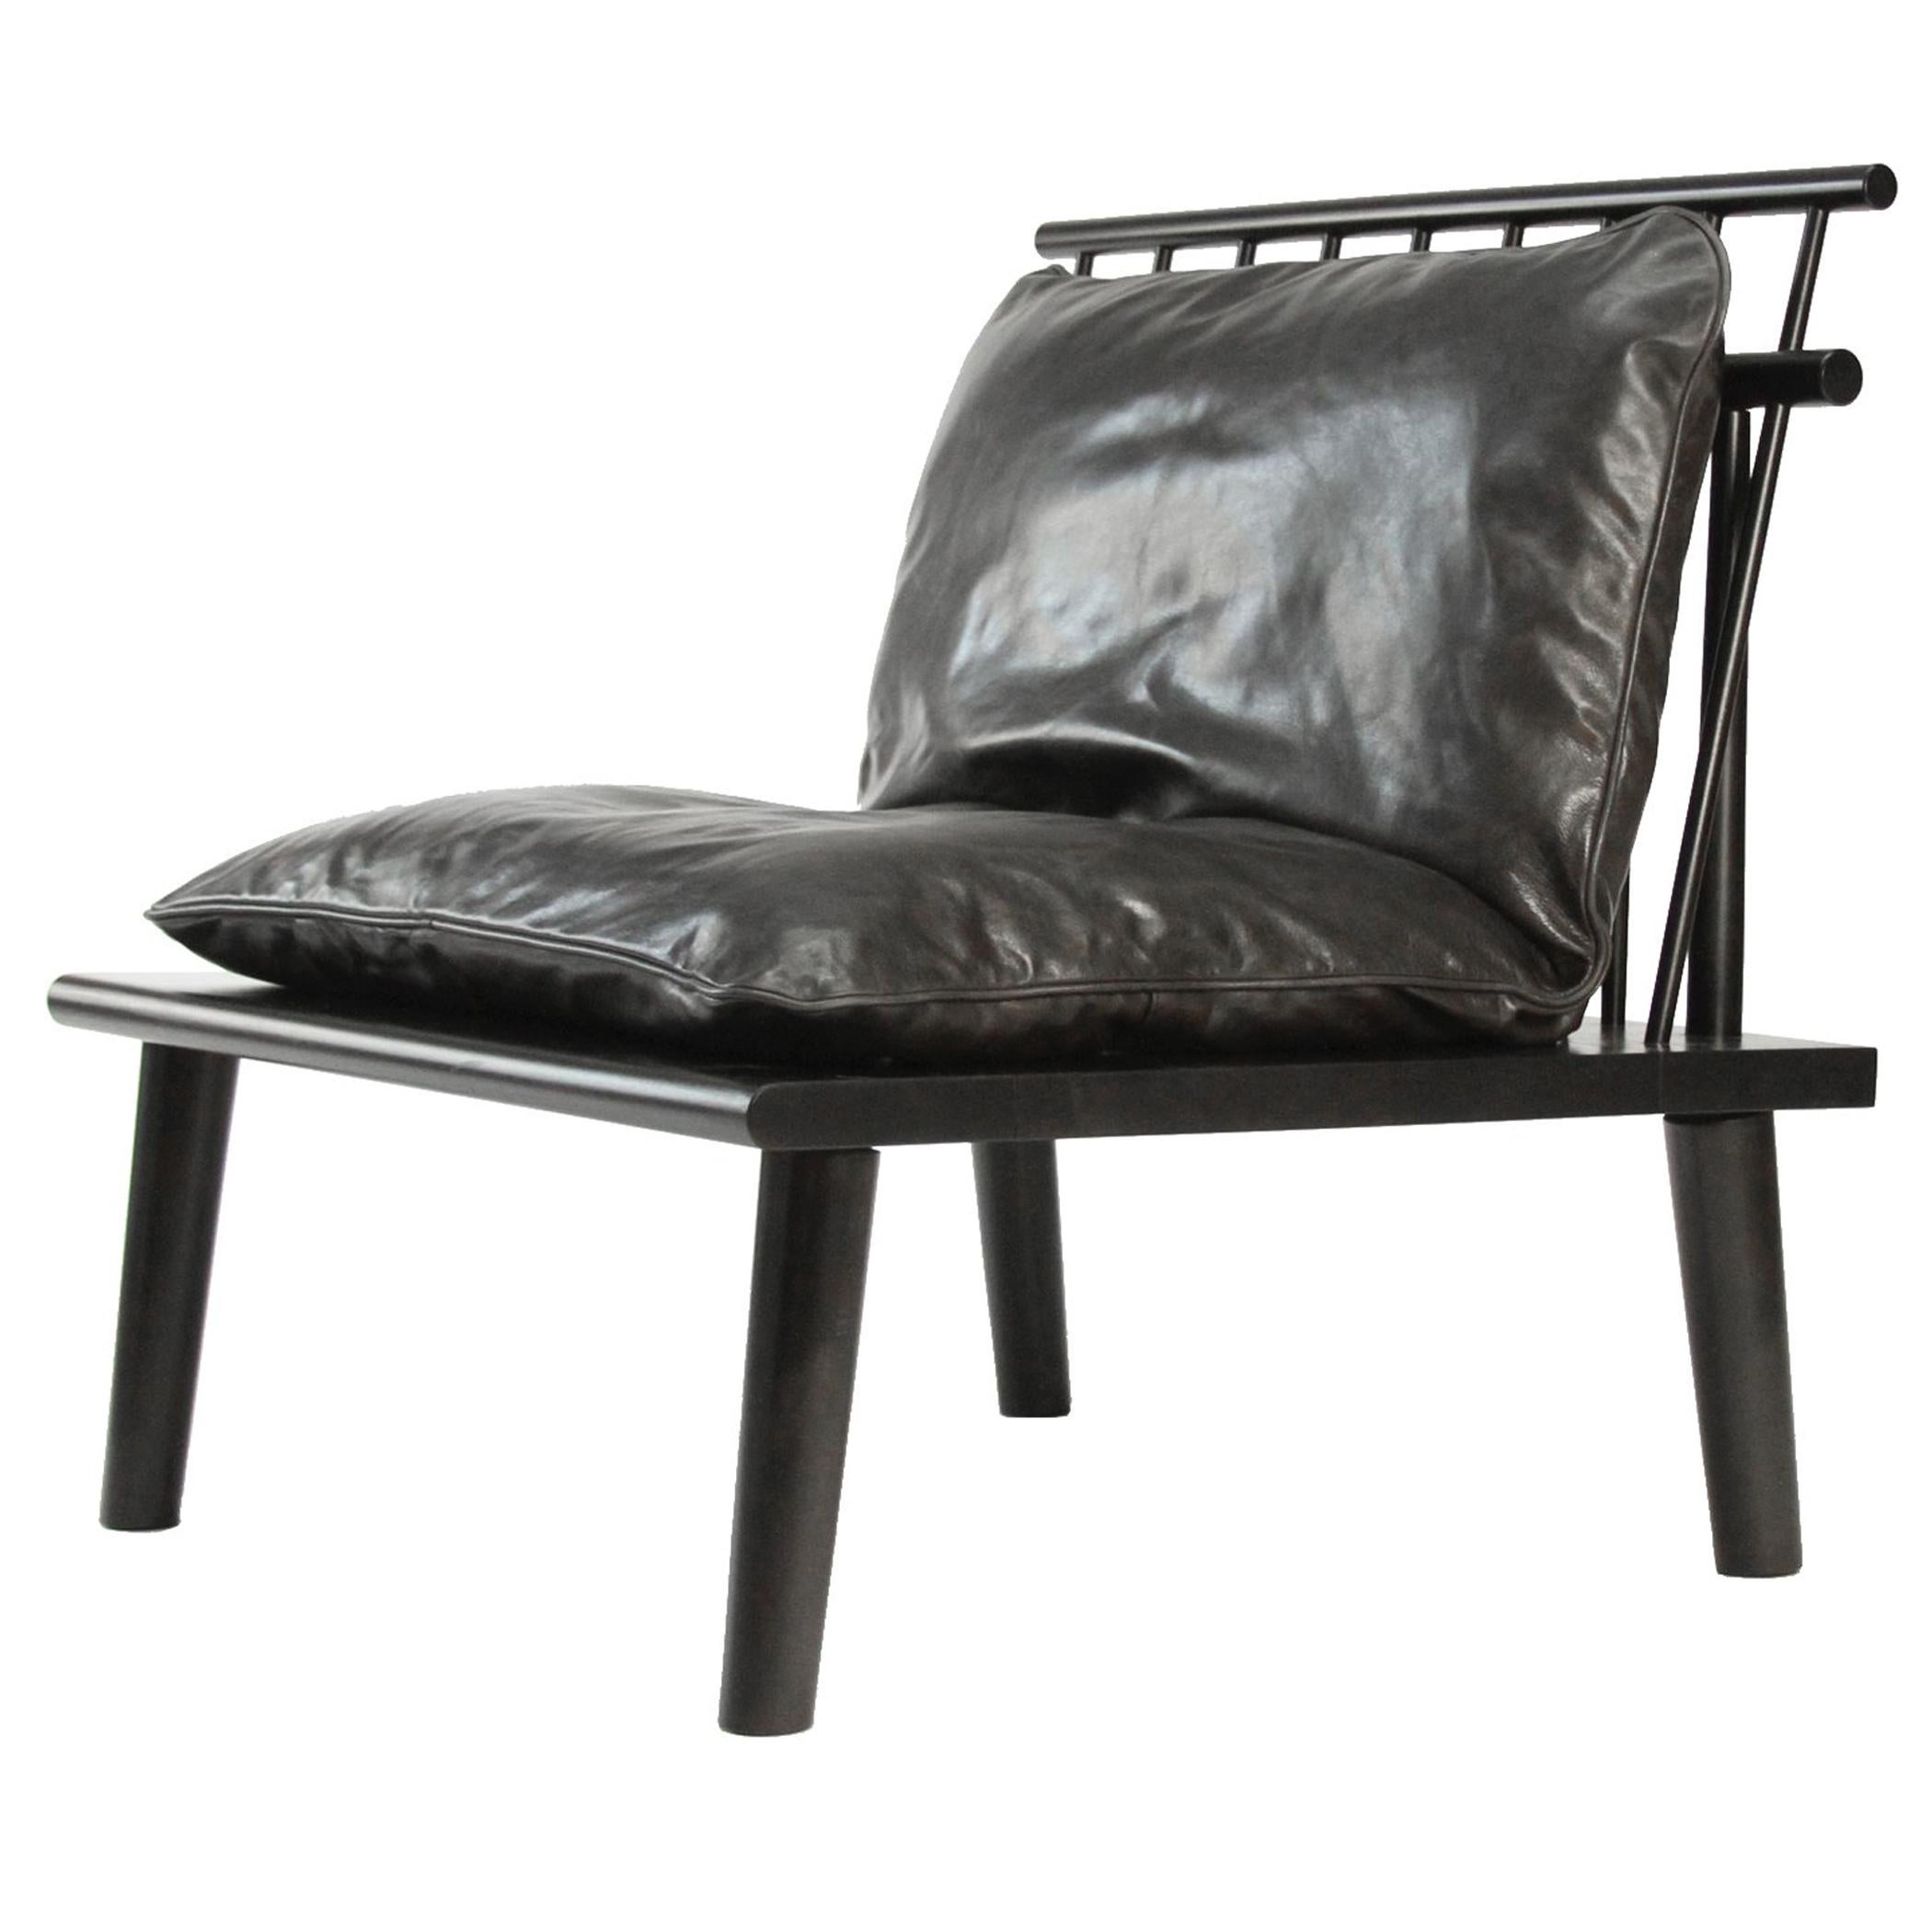 Matunuck Windsor Chair in Ebony Stain on Maple Wood with Charcoal Leather For Sale